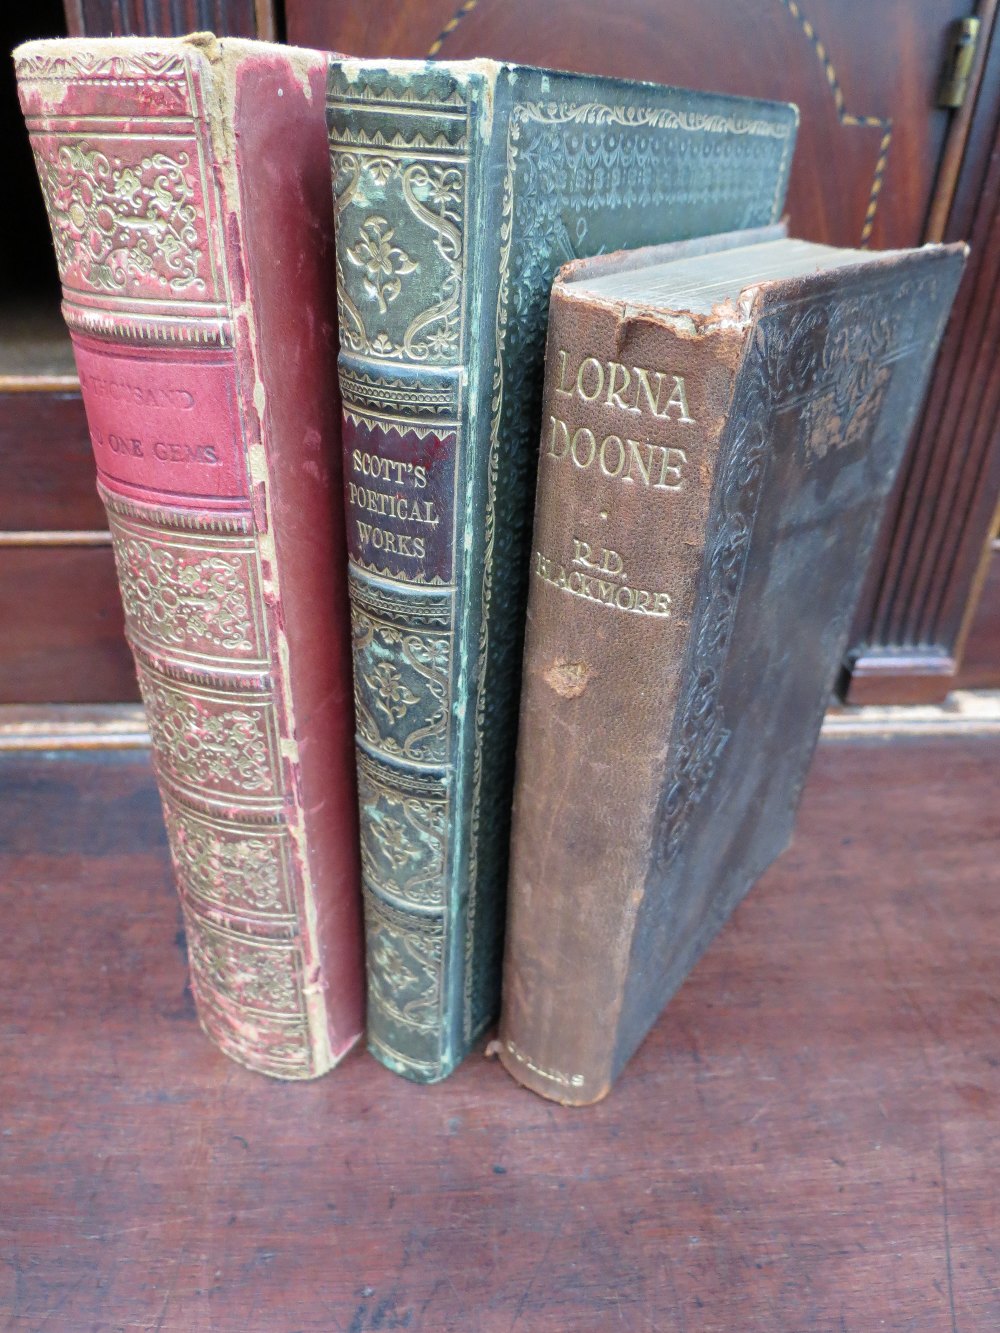 Lorna Doone, R D Blackmoore, Scotts Poetical Works 1841 and One Thousand and One Gems. Leather